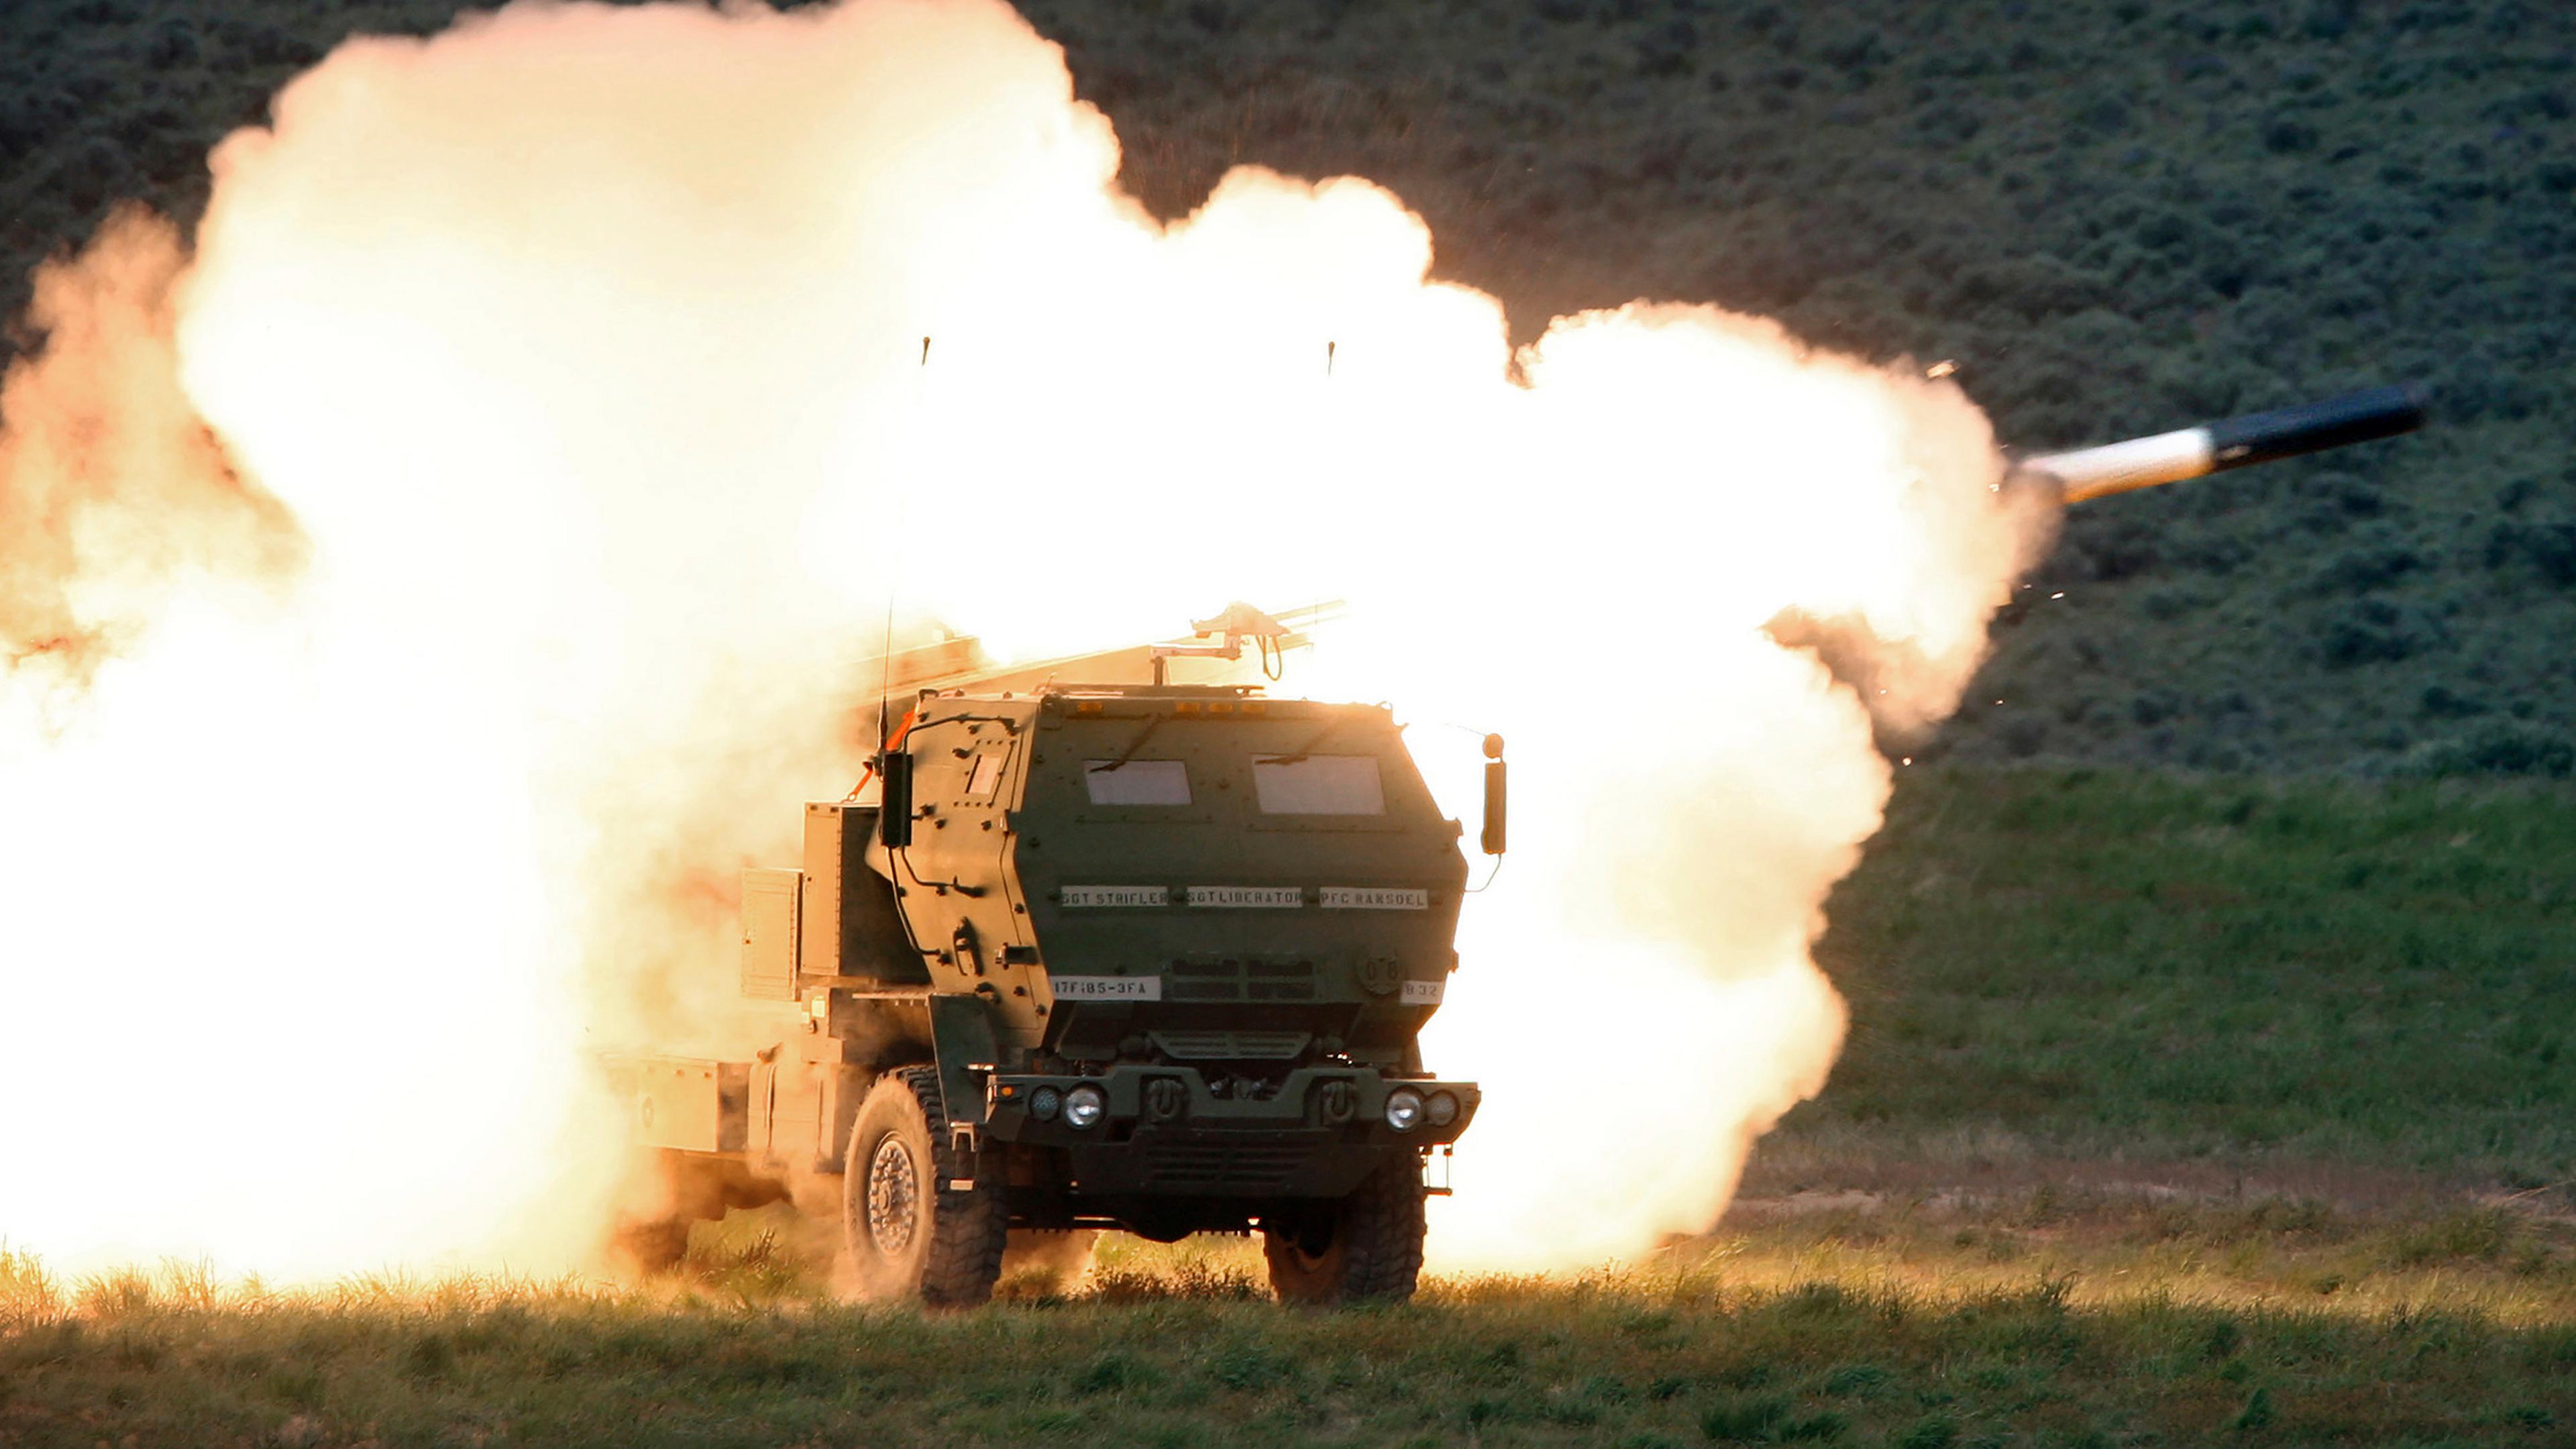 A version of the HIMARS mobile missile system manufactured by Lockheed Martin at a test site in Washington state.